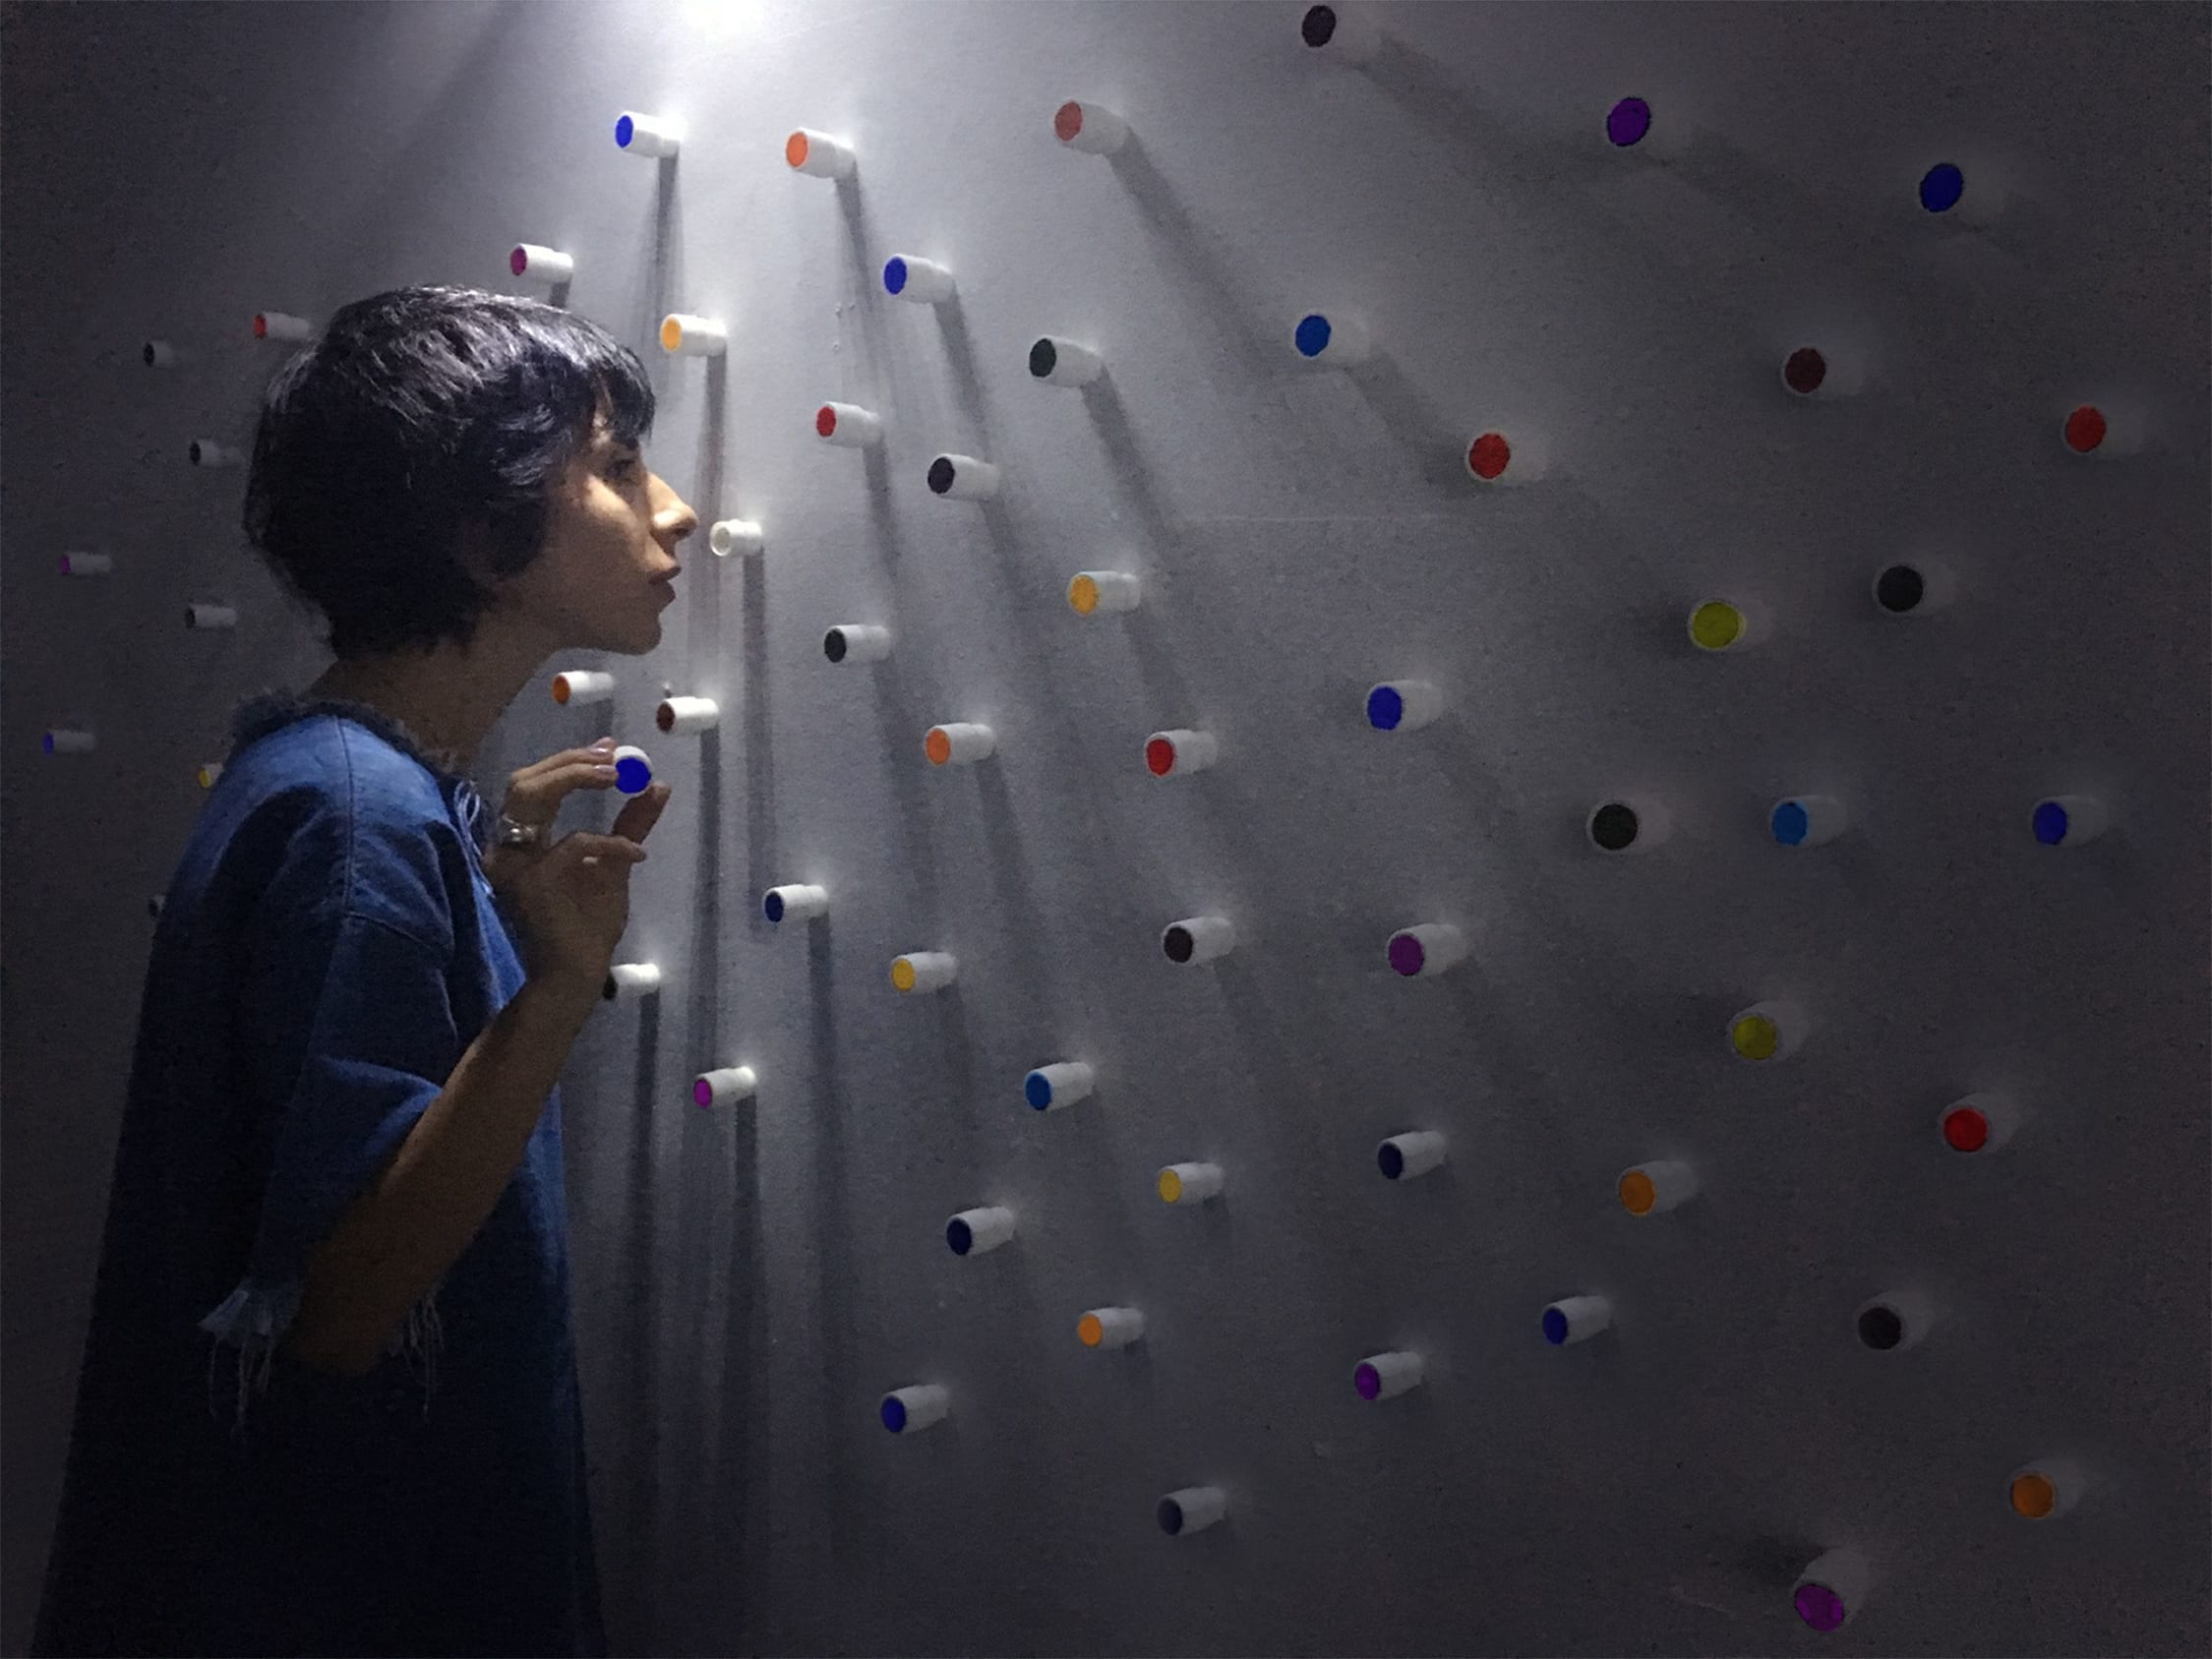 A woman with olive skin and short black hair stands in a dark room with her face and hands close to a perspex wall containing many multicoloured tubes at regular intervals. She is smelling the tubes.